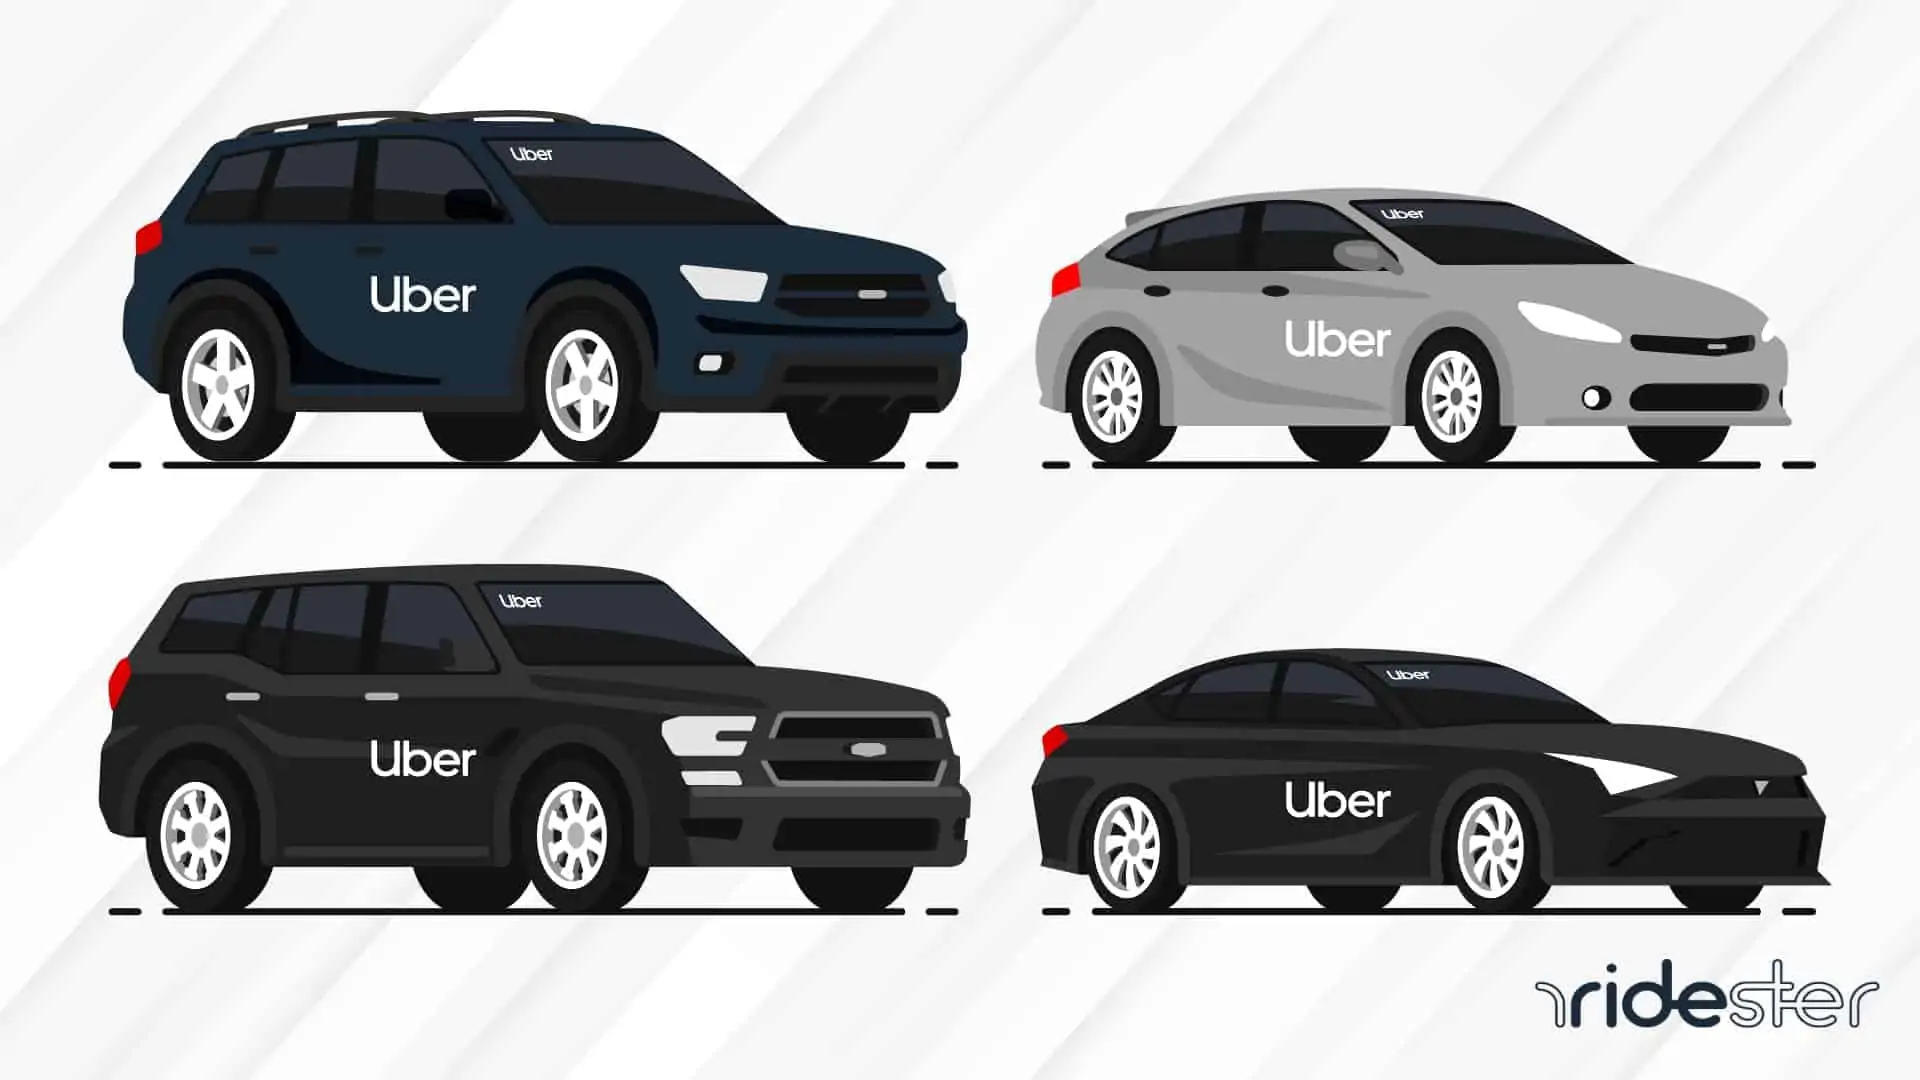 header image showing the best cars for uber - four cars side by side with one another with the uber logo on all of them